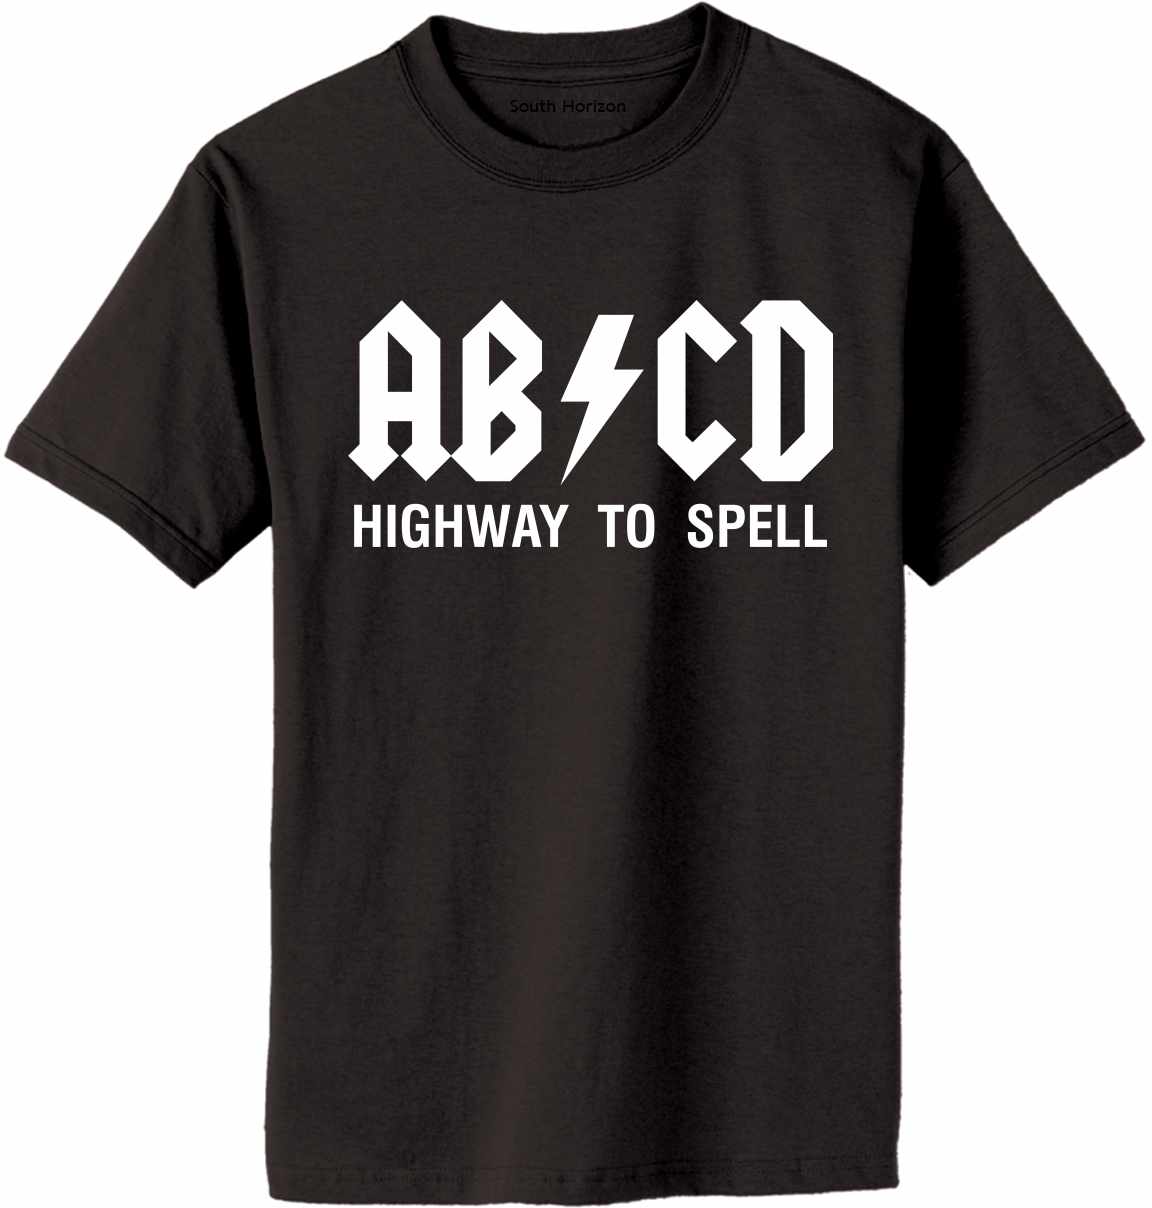 ABCD Highway To Spell on Adult T-Shirt